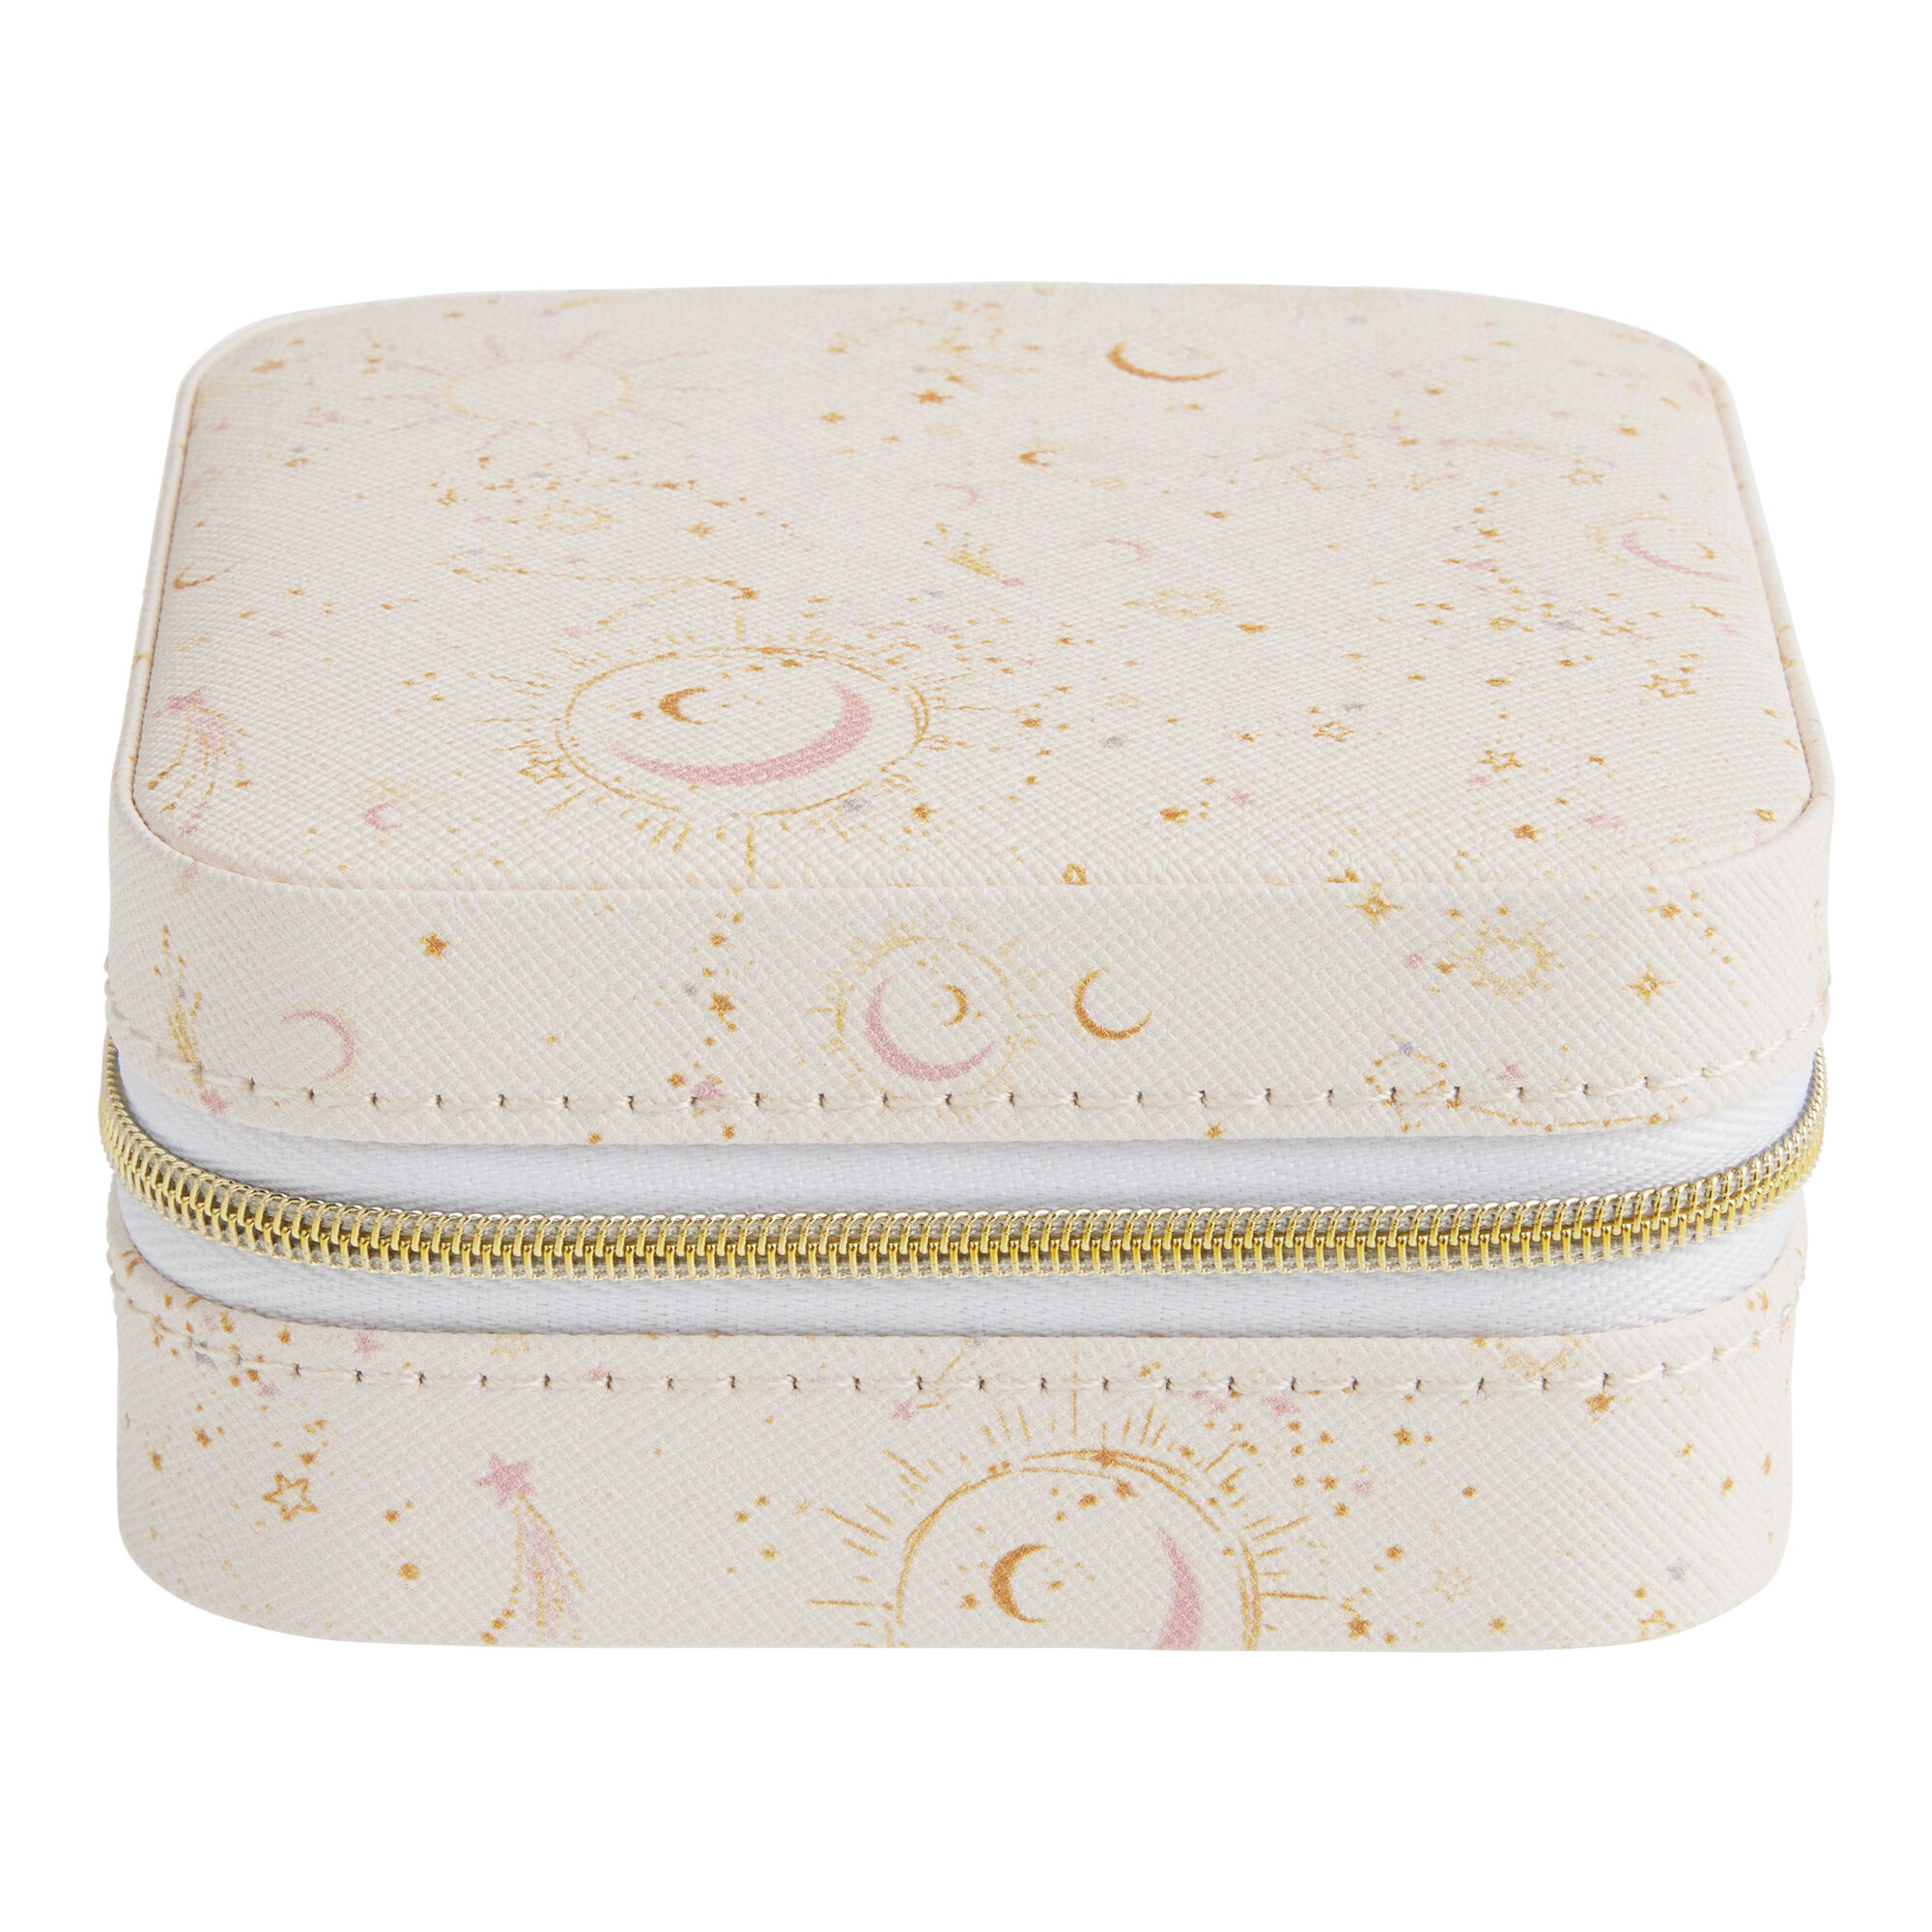 Ivory And Gold Faux Leather Celestial Travel Jewelry Box - World Market